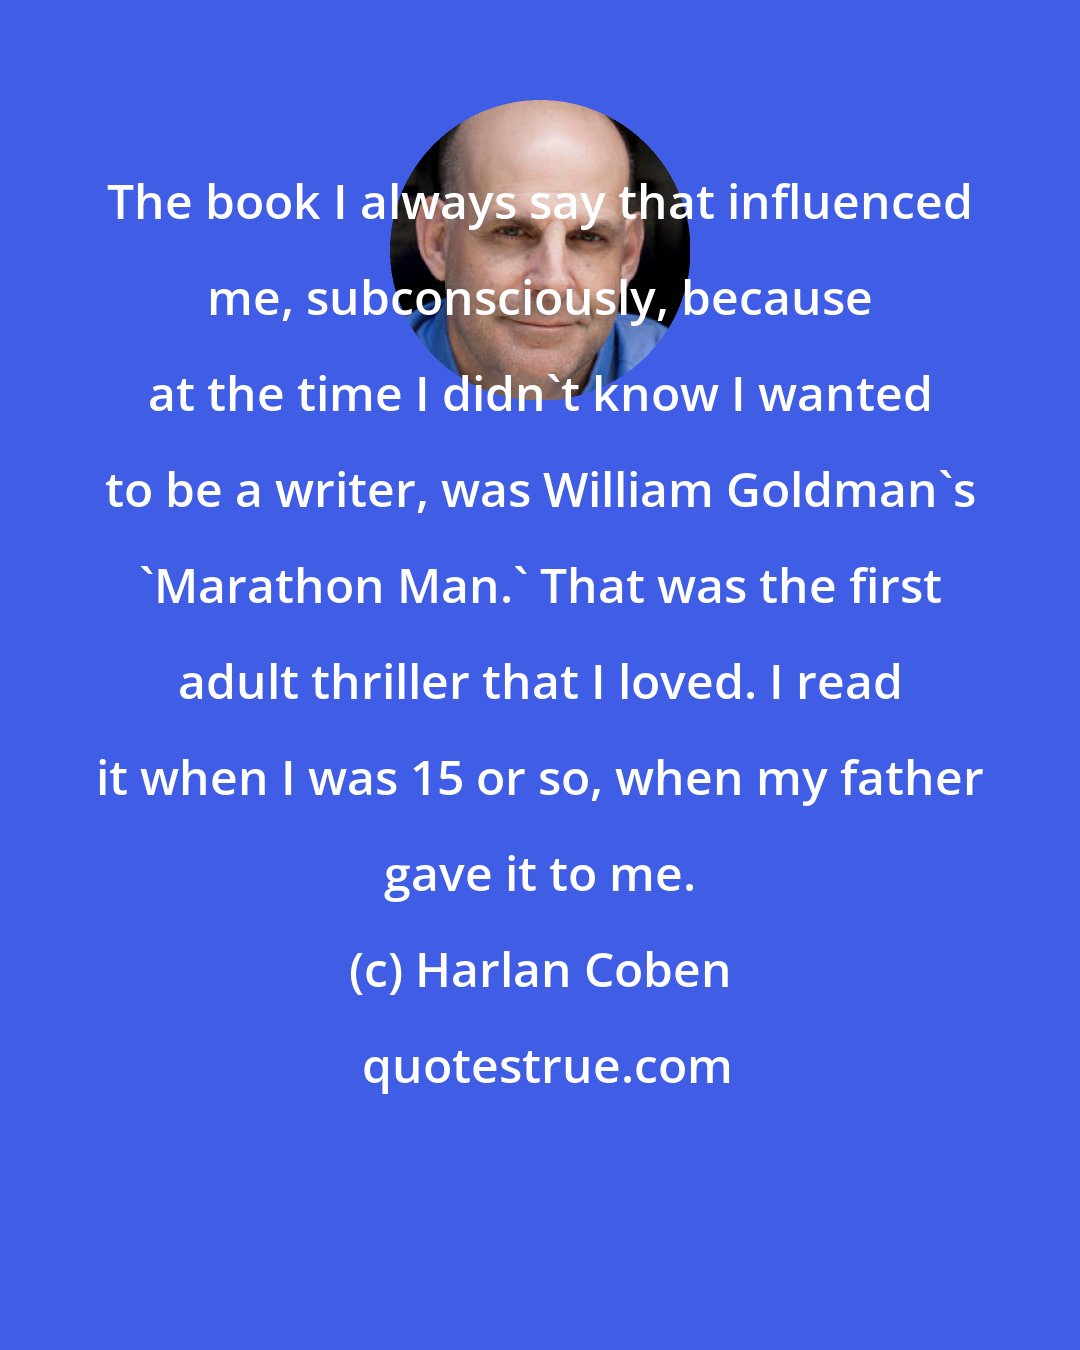 Harlan Coben: The book I always say that influenced me, subconsciously, because at the time I didn't know I wanted to be a writer, was William Goldman's 'Marathon Man.' That was the first adult thriller that I loved. I read it when I was 15 or so, when my father gave it to me.